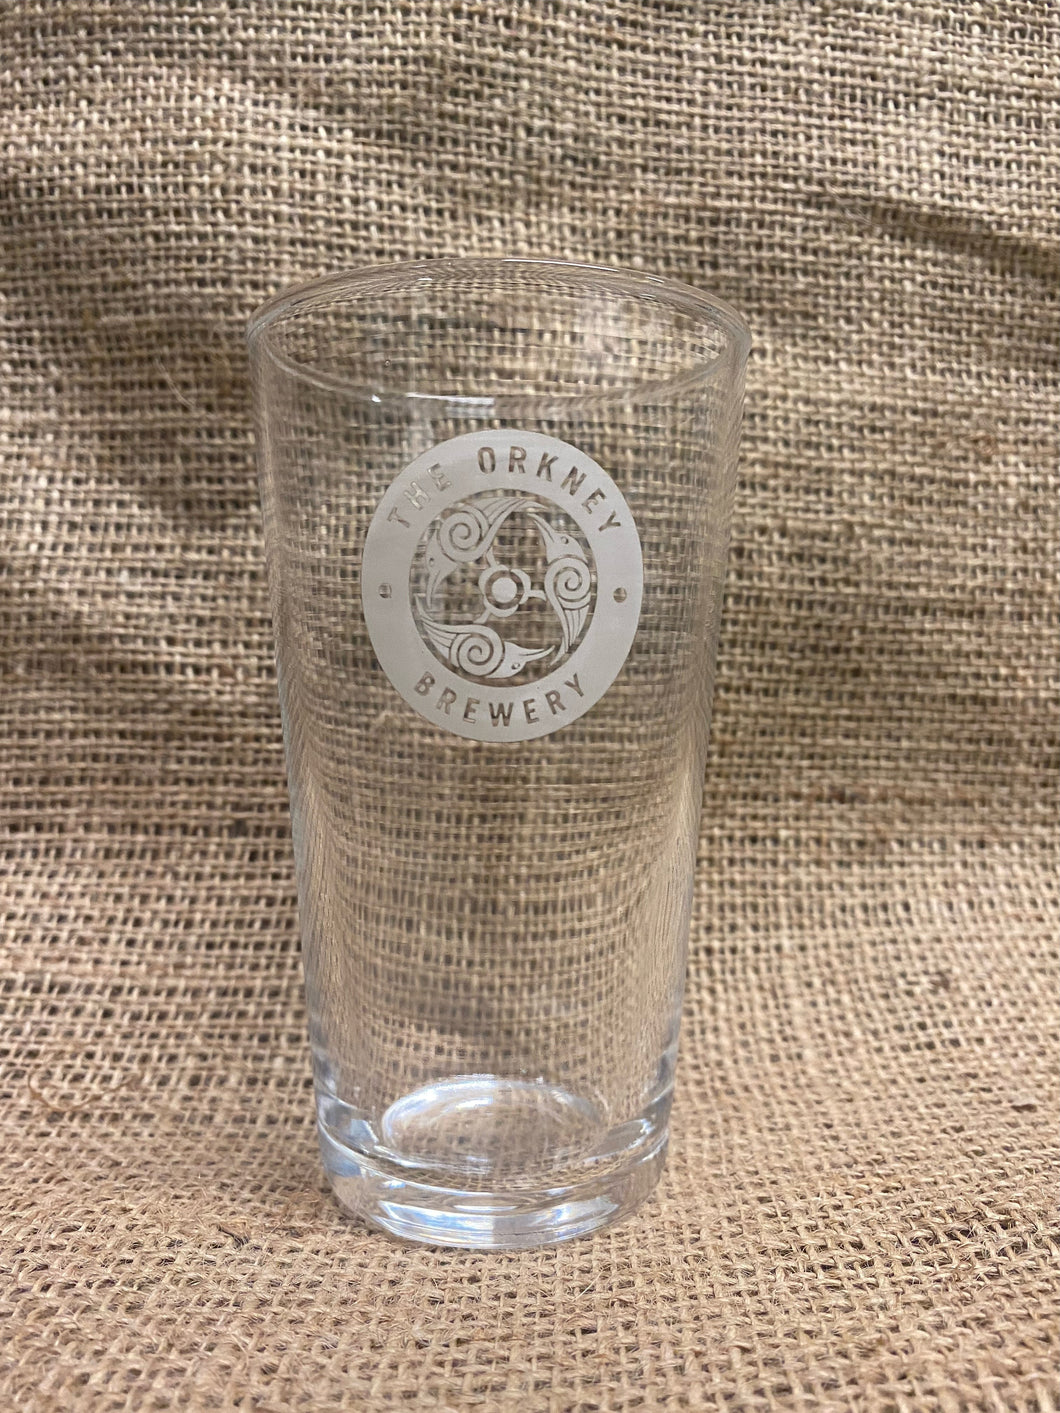 Orkney Brewery Half Pint Glass